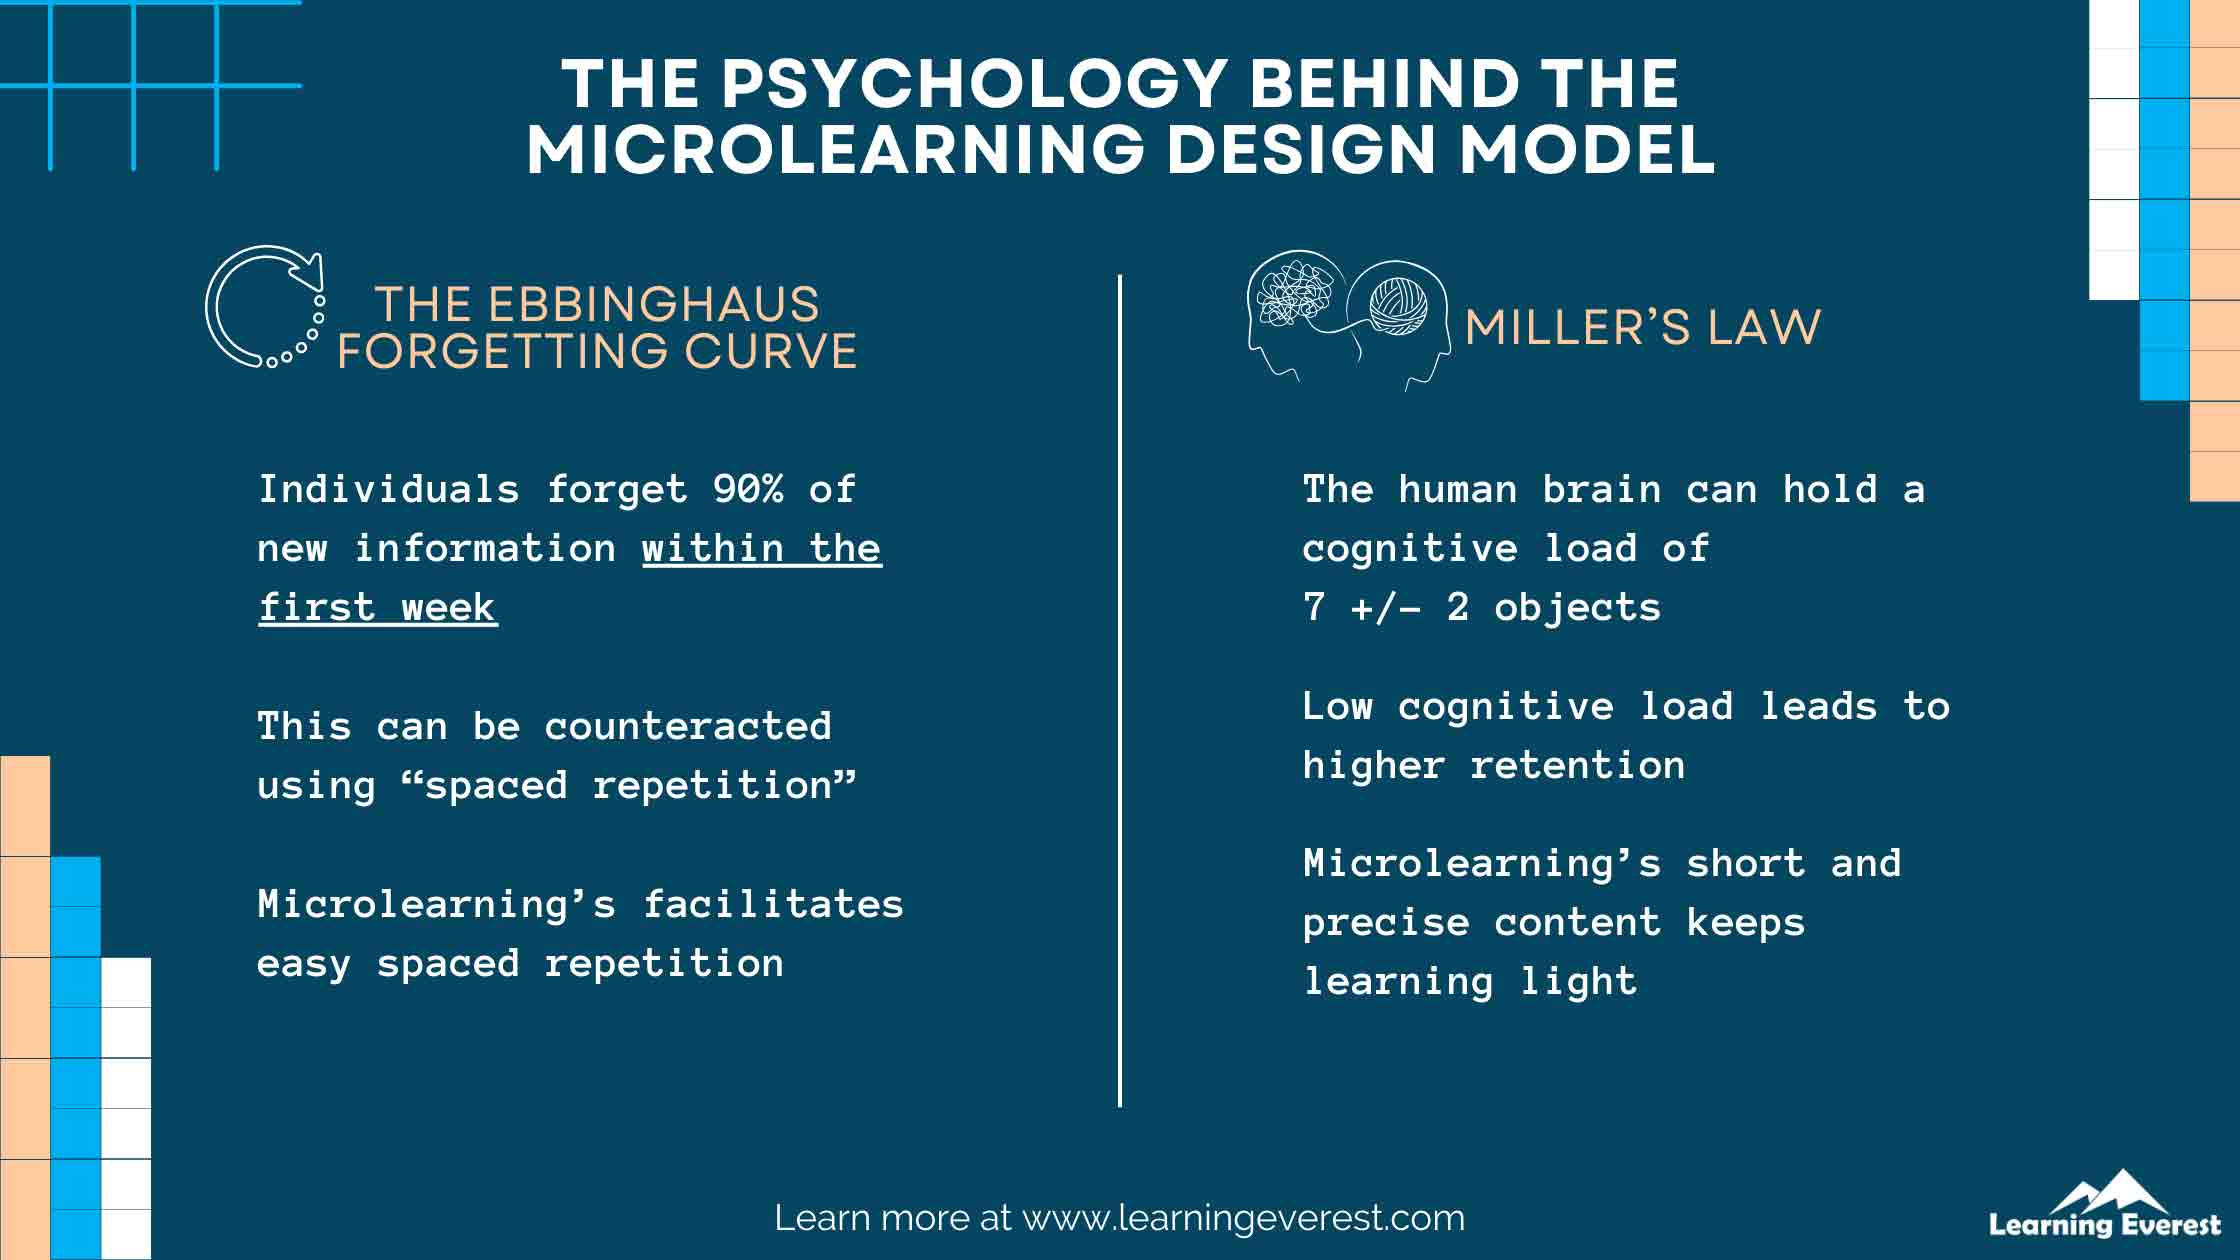 The Psychology Behind the Microlearning Design Model